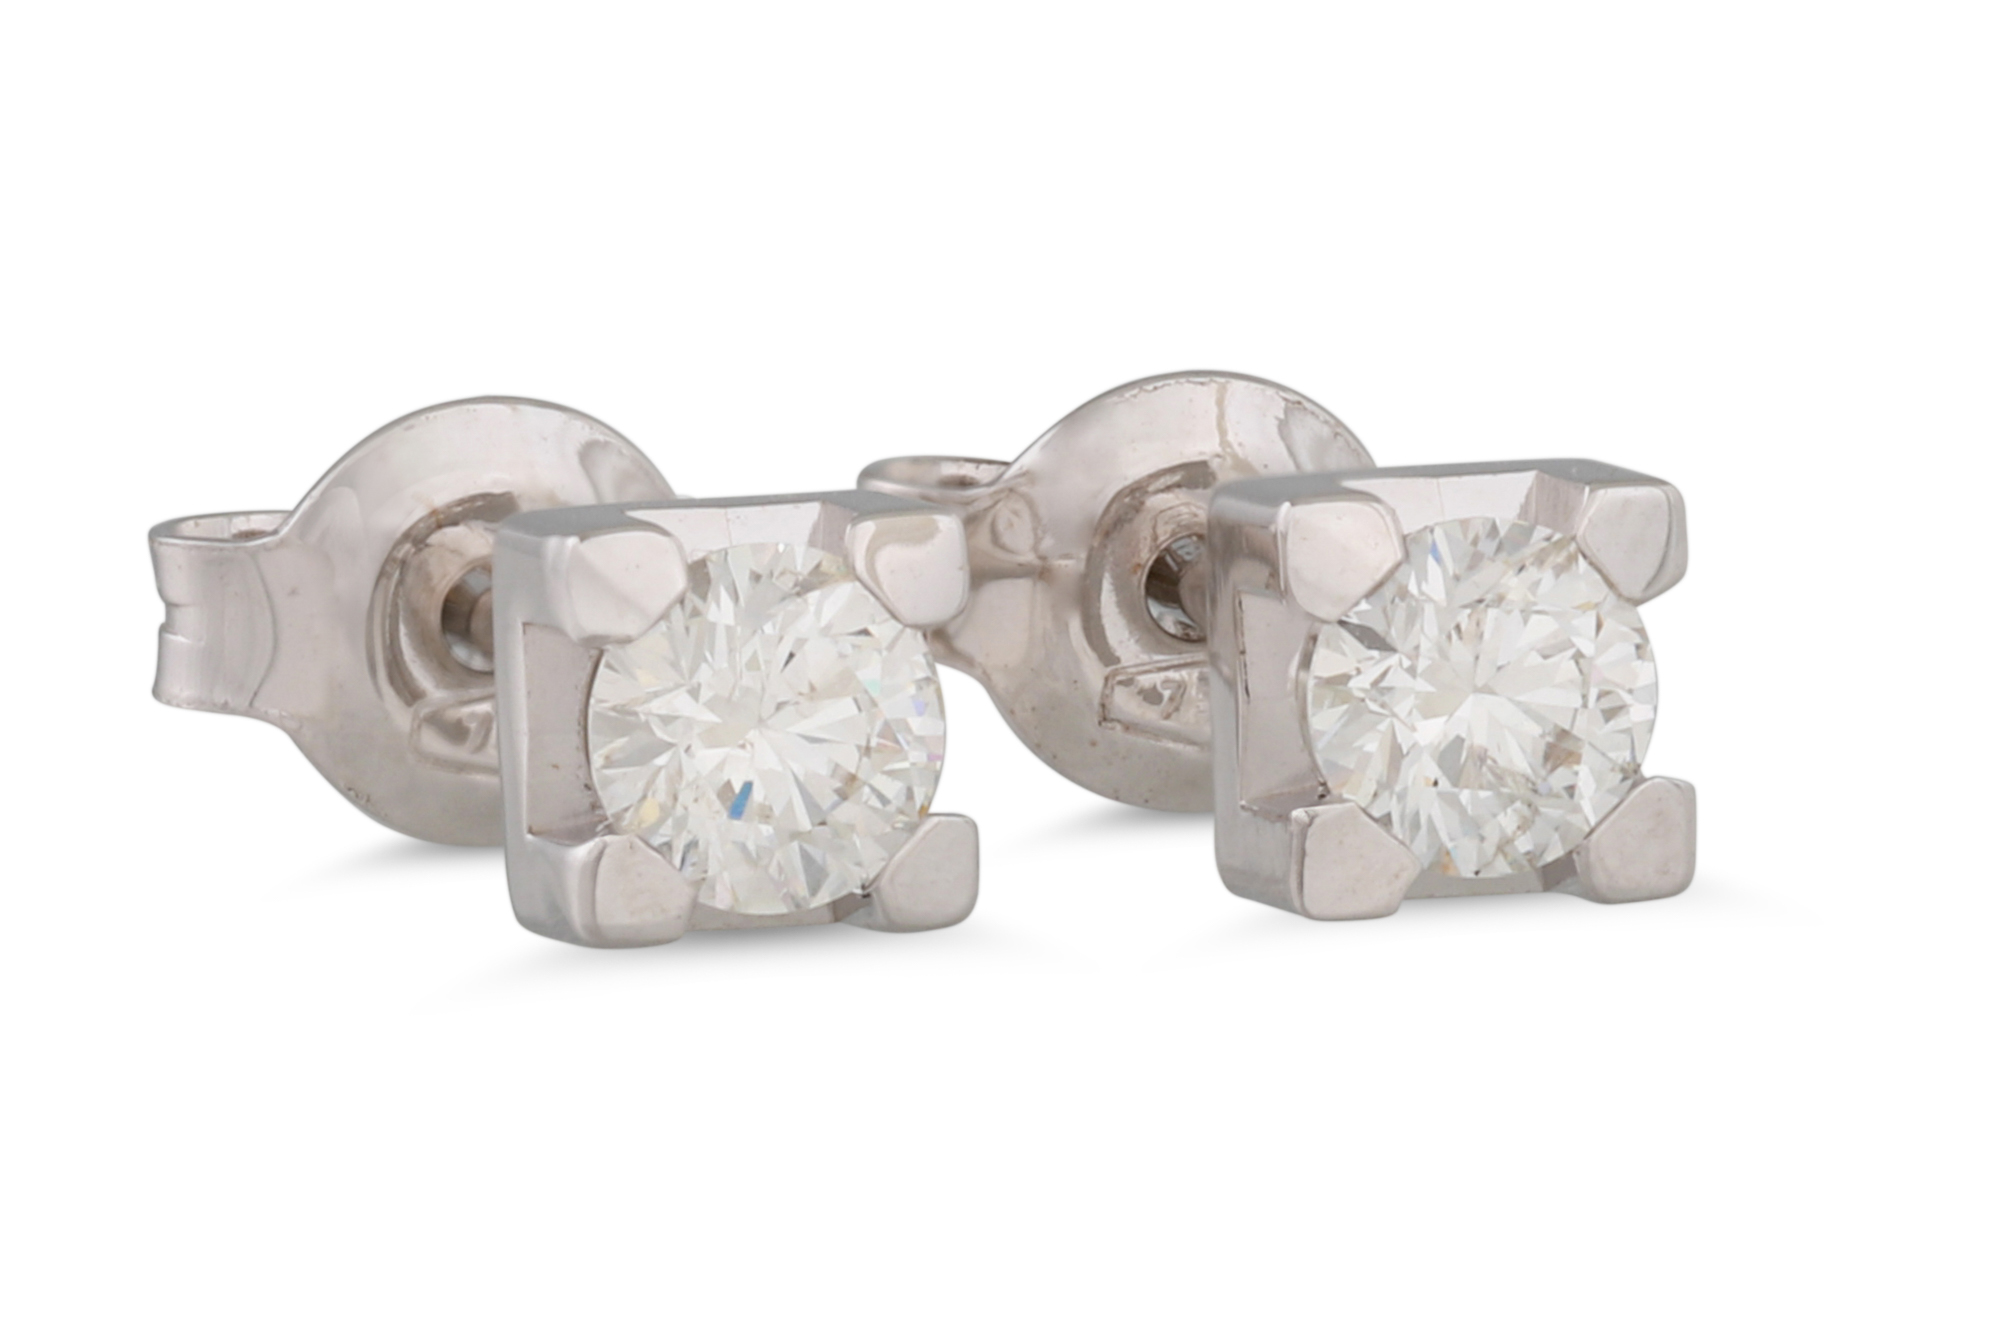 A PAIR OF DIAMOND STUD EARRINGS, the brilliant cut diamonds in square mounts, in 18ct white gold.